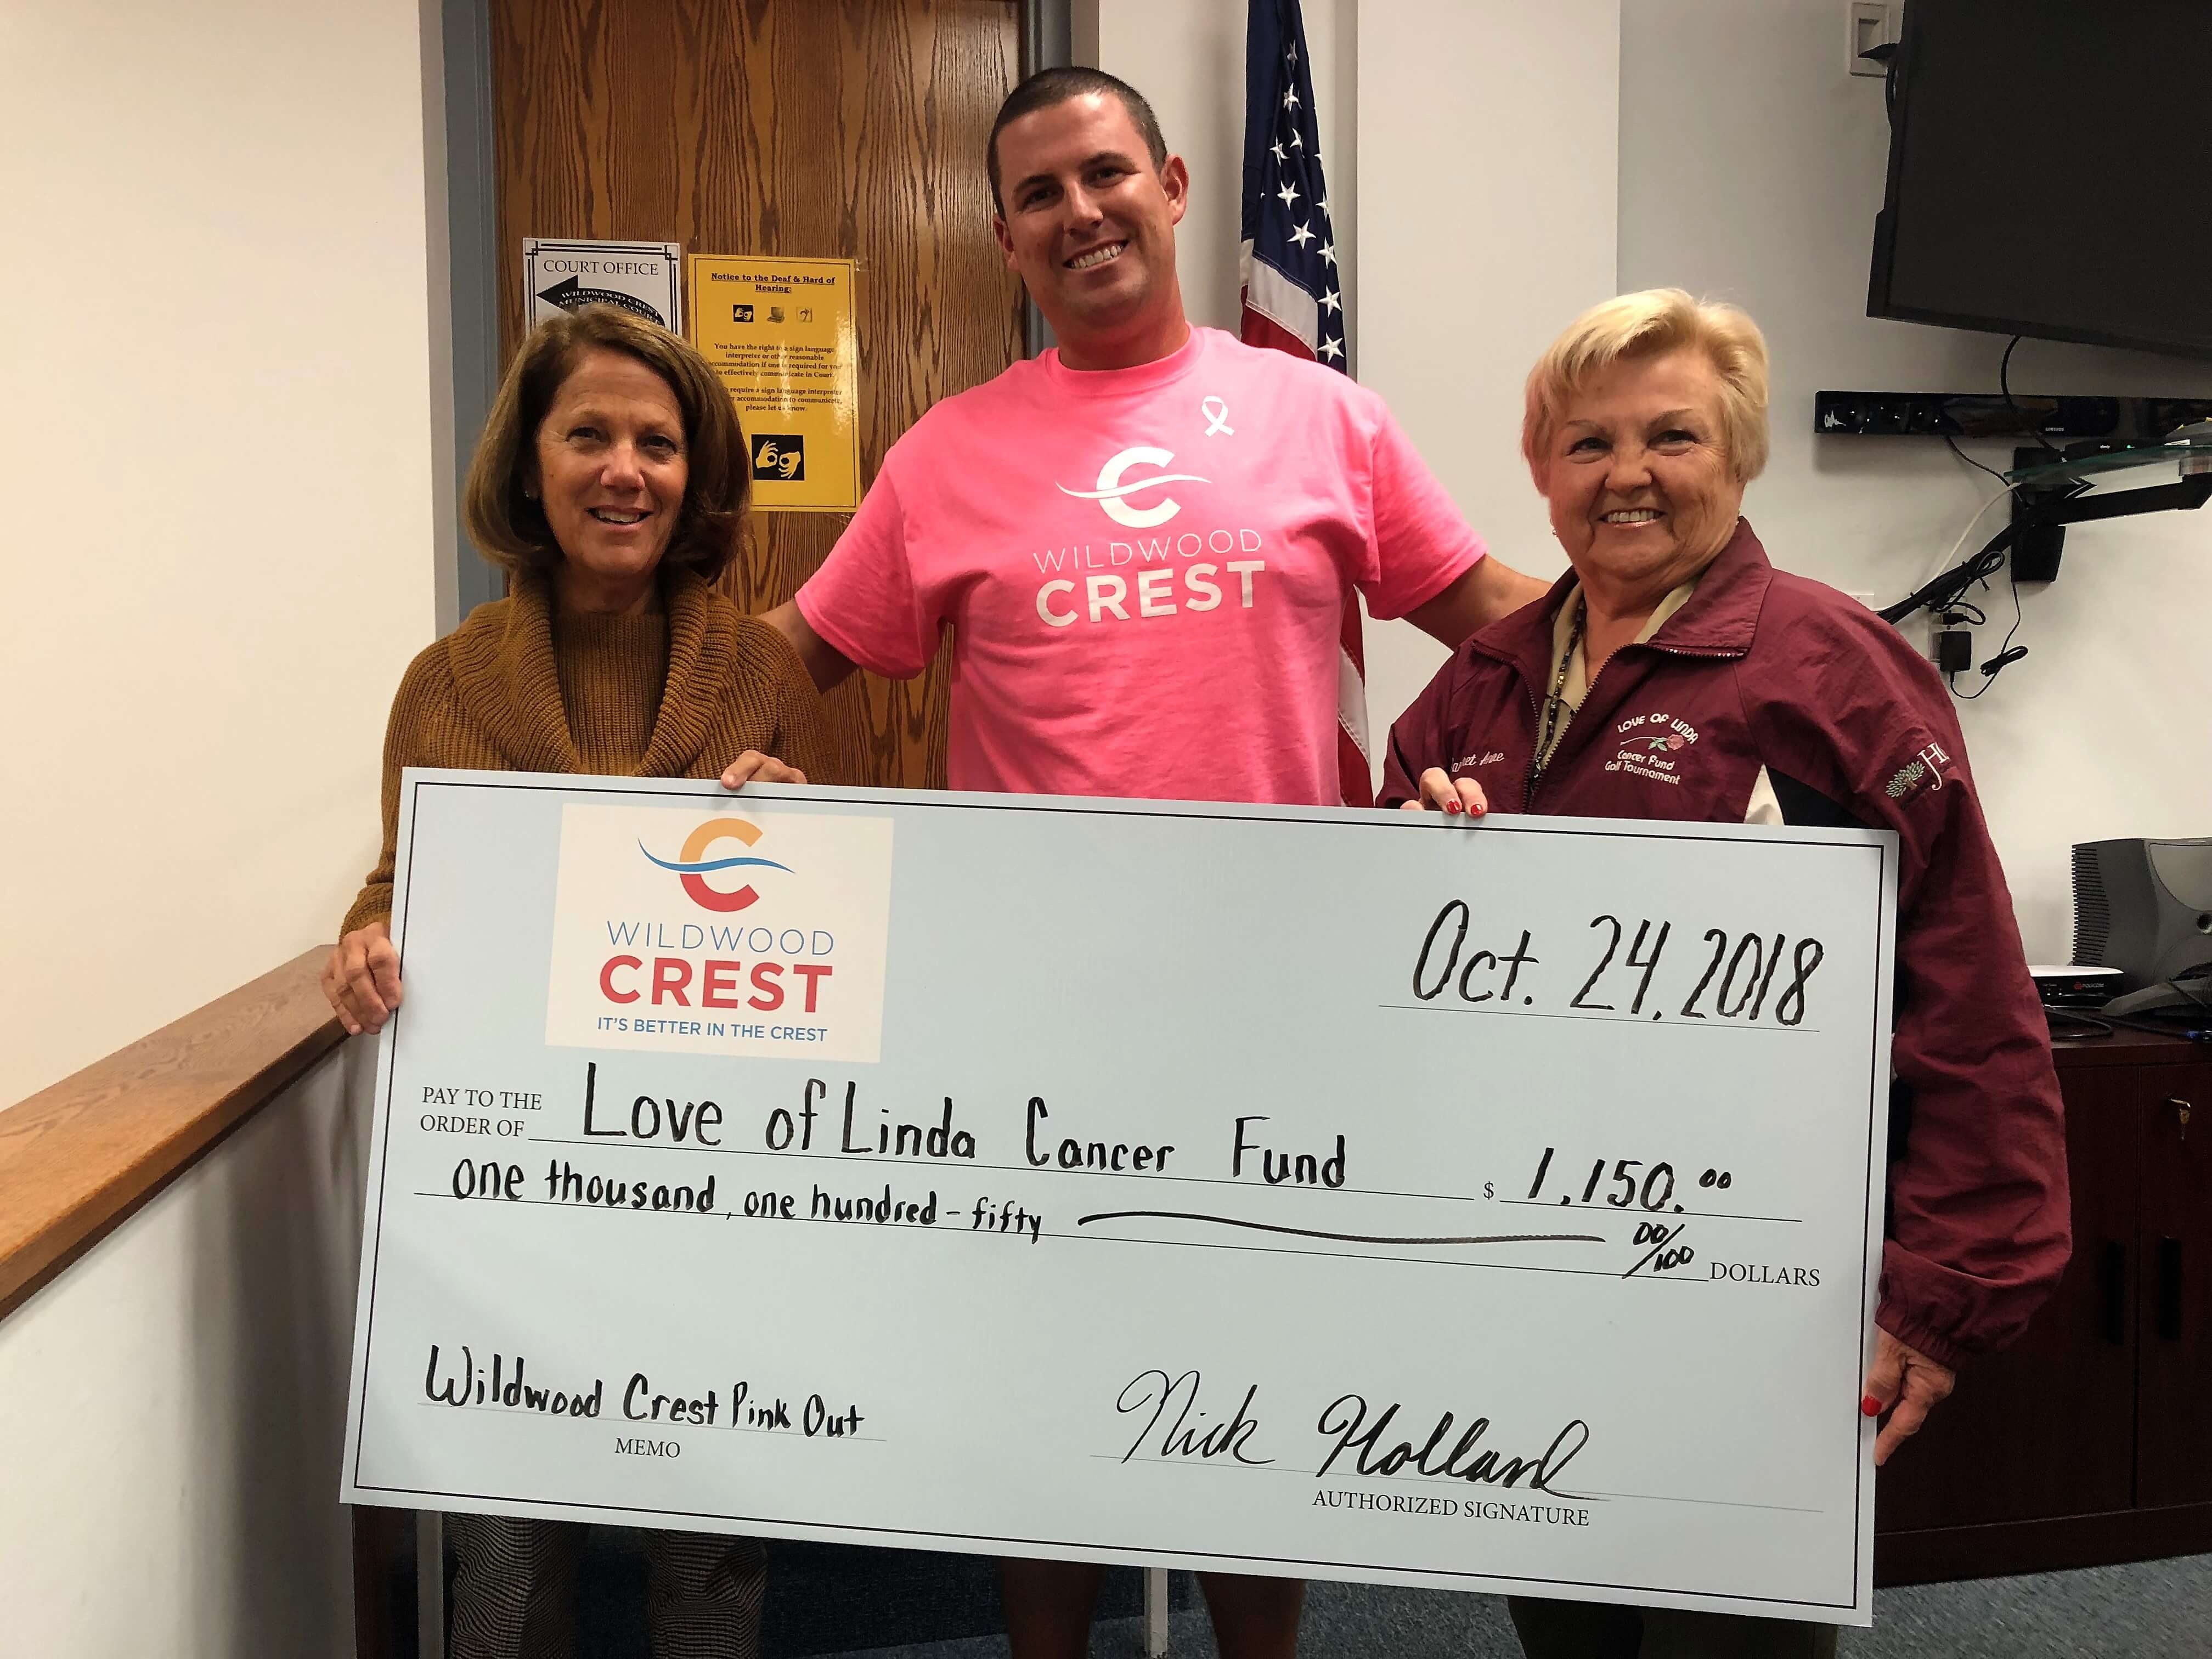 Borough of Wildwood Crest Wellness Committee coordinator Nick Holland (center) presents a commemorative check for $1